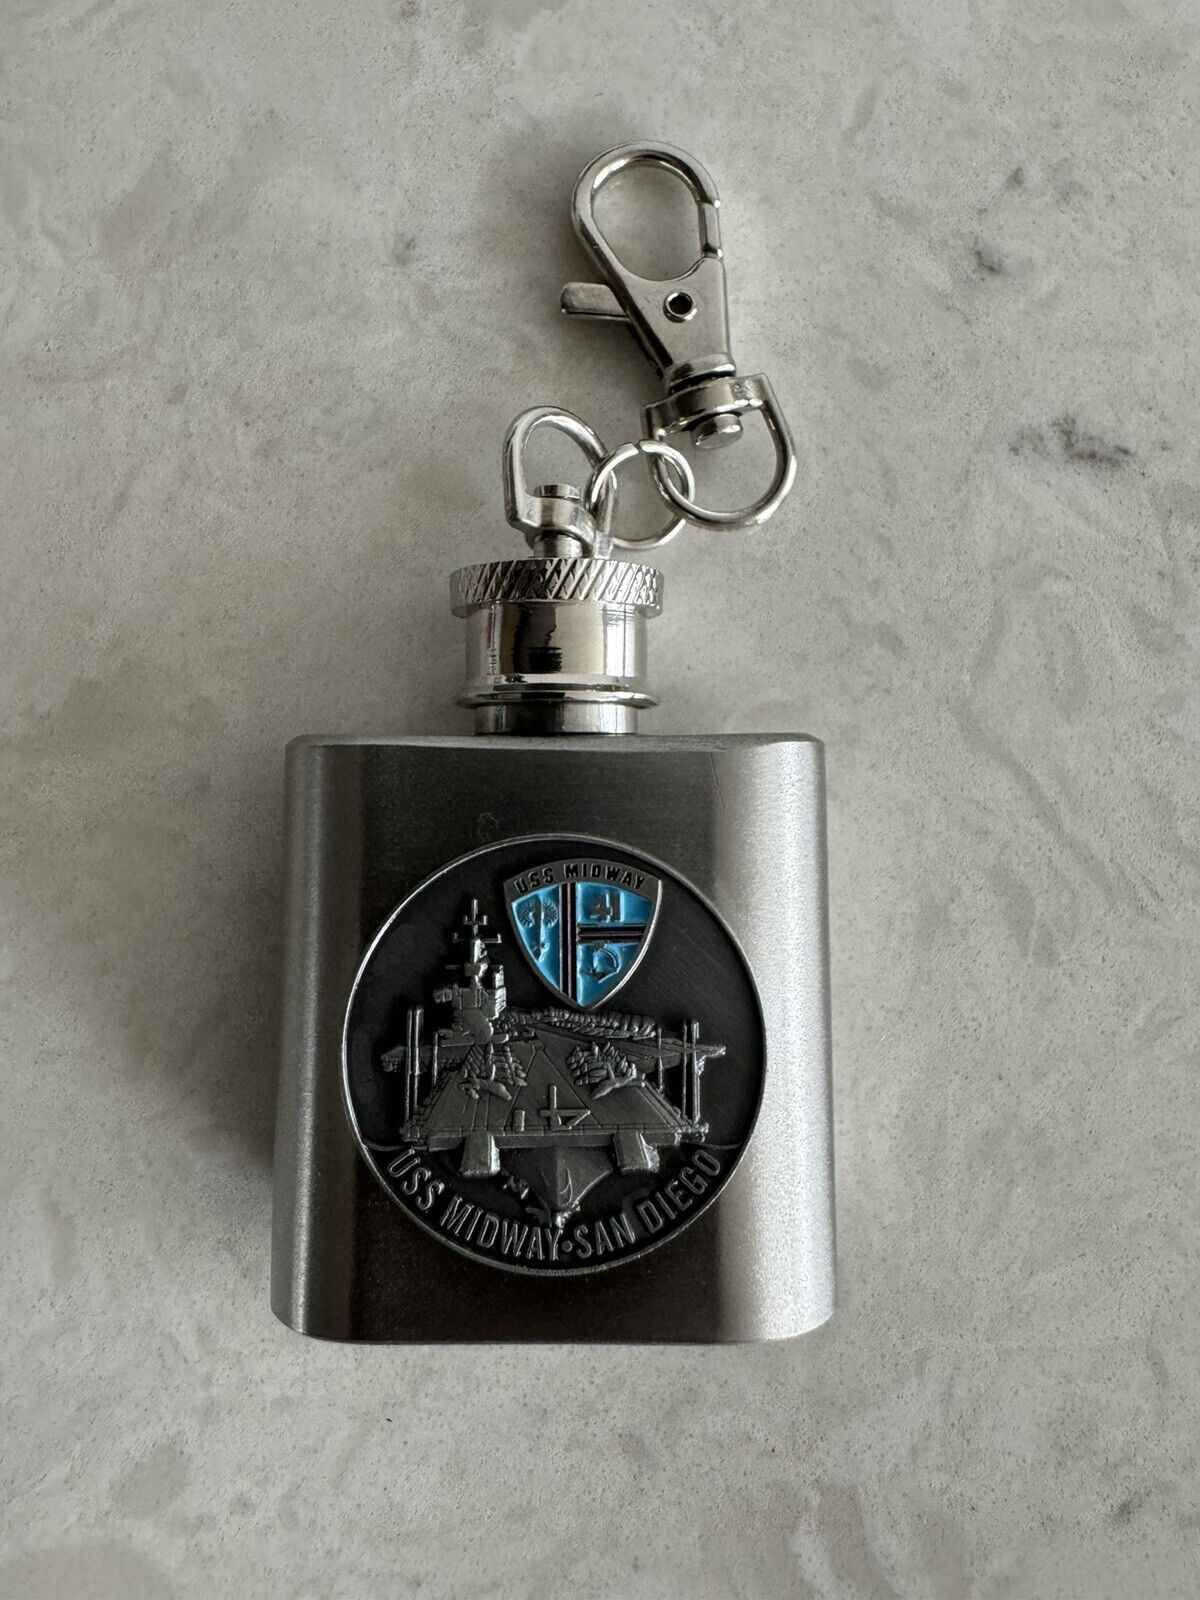 1 oz Brushed STAINLESS STEEL USS MIDWAY SAN DIEGO MINI FLASK KEY CHAIN (NEW)